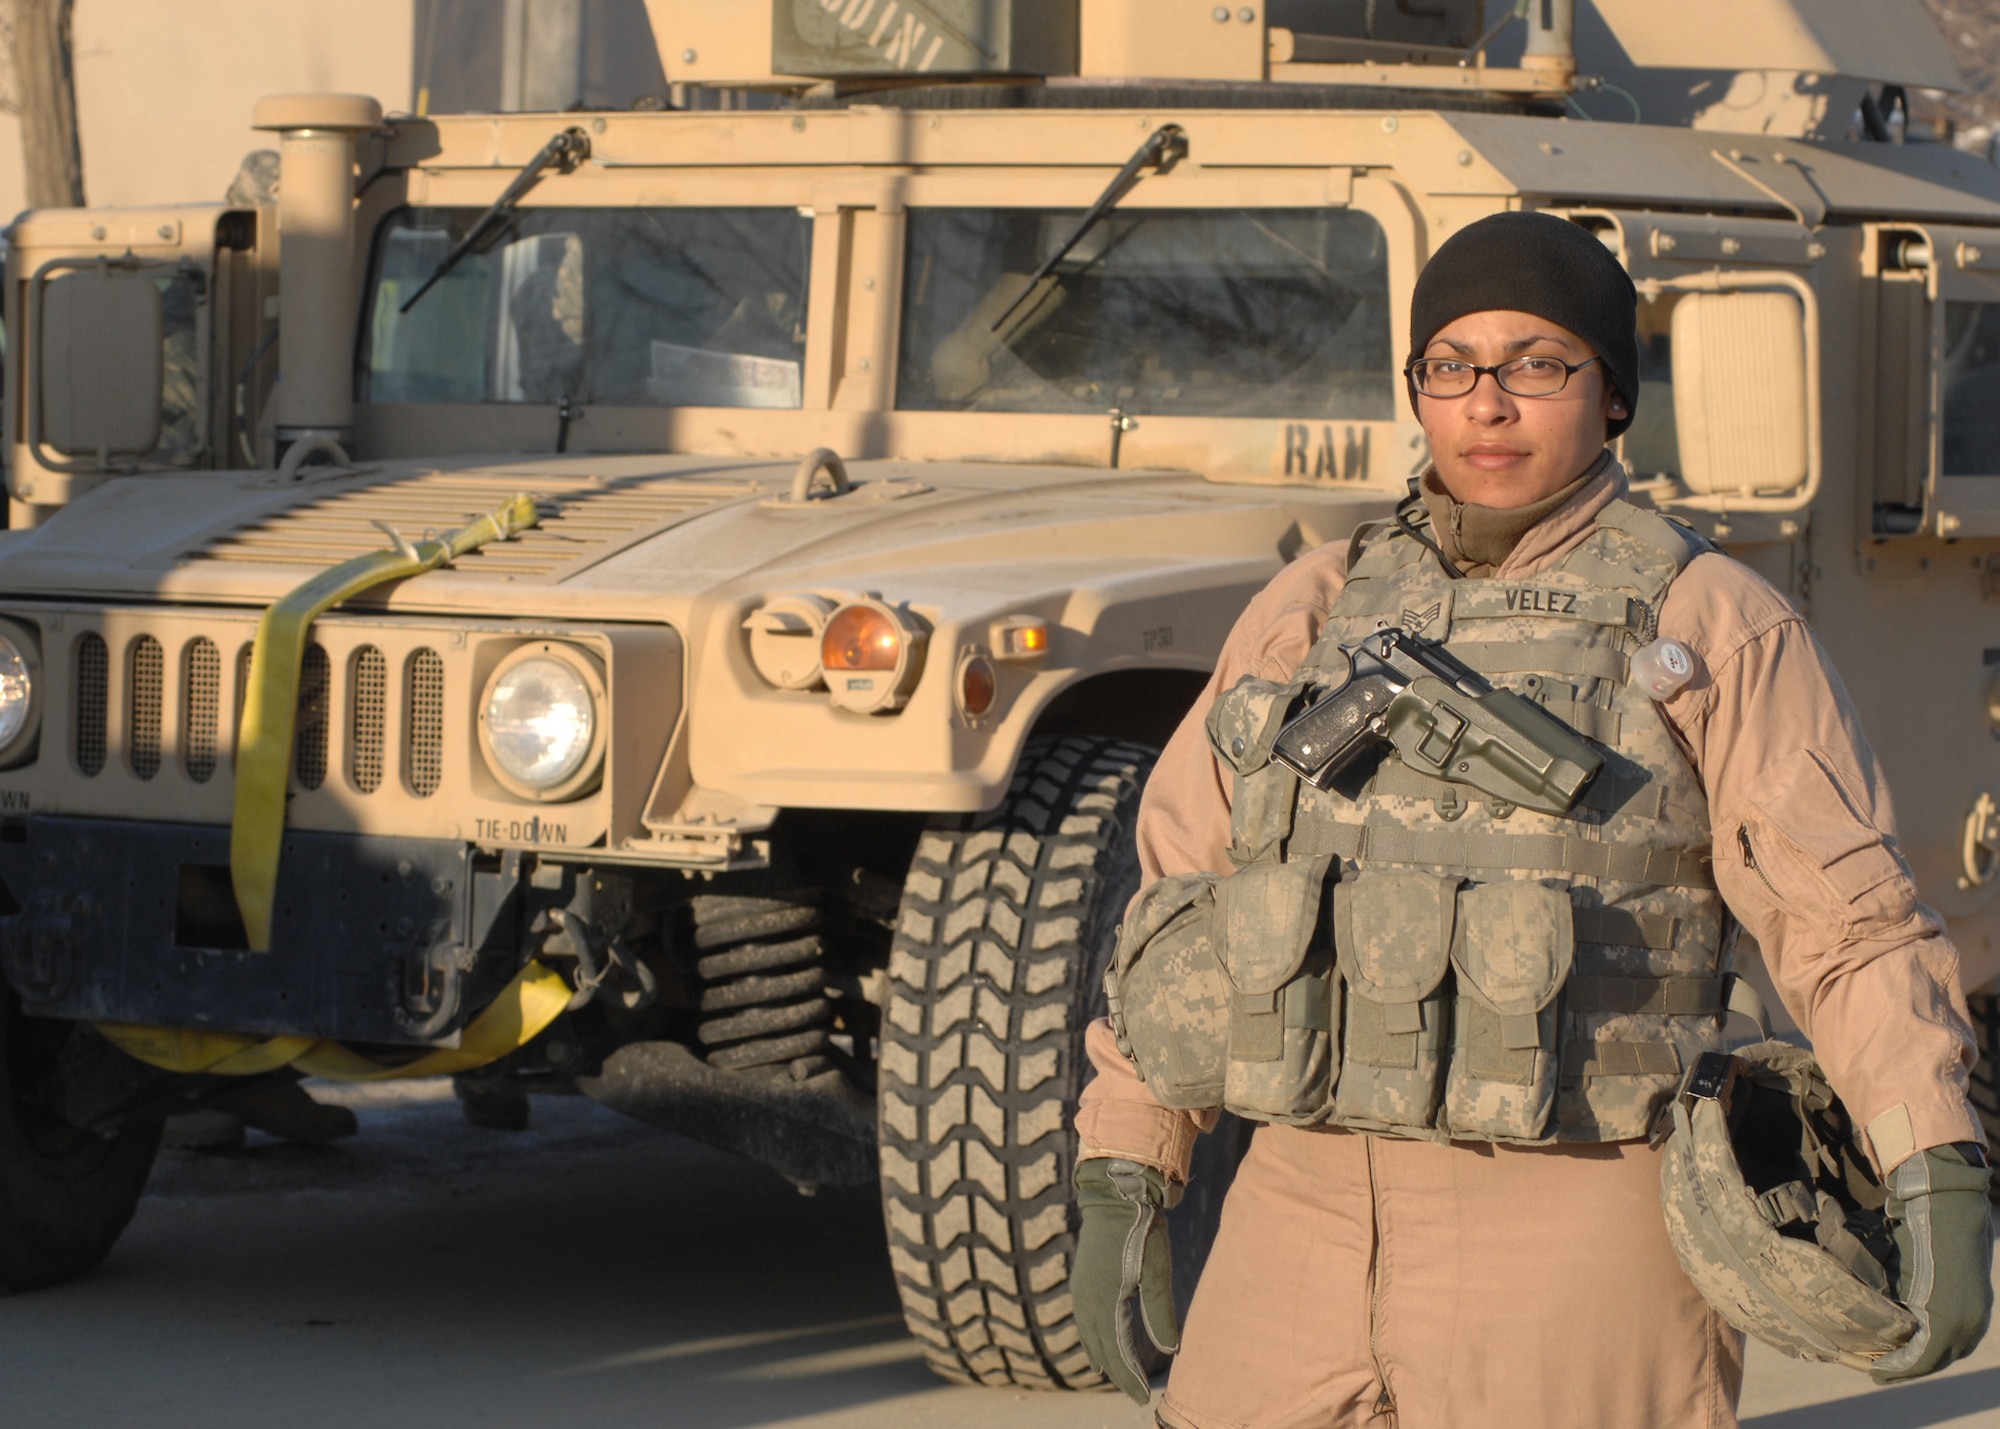 BAGRAM AIR BASE, Afghanistan - Senior Airman Vanessa Velez, a convoy driver with the Bagram Provincial Reconstruction Team, poses for a photo in front of the humvee she will be driving just before her next mission outside the wire here Feb. 10. Velez, who is a vehicle maintenance controller with the 6th Logistics Readiness Squadron at MacDill Air Force Base, Fla., has driven at least 120 convoys during her 365-day deployment in Afghanistan. (U.S. Air Force photo by Master Sgt. Demetrius Lester)